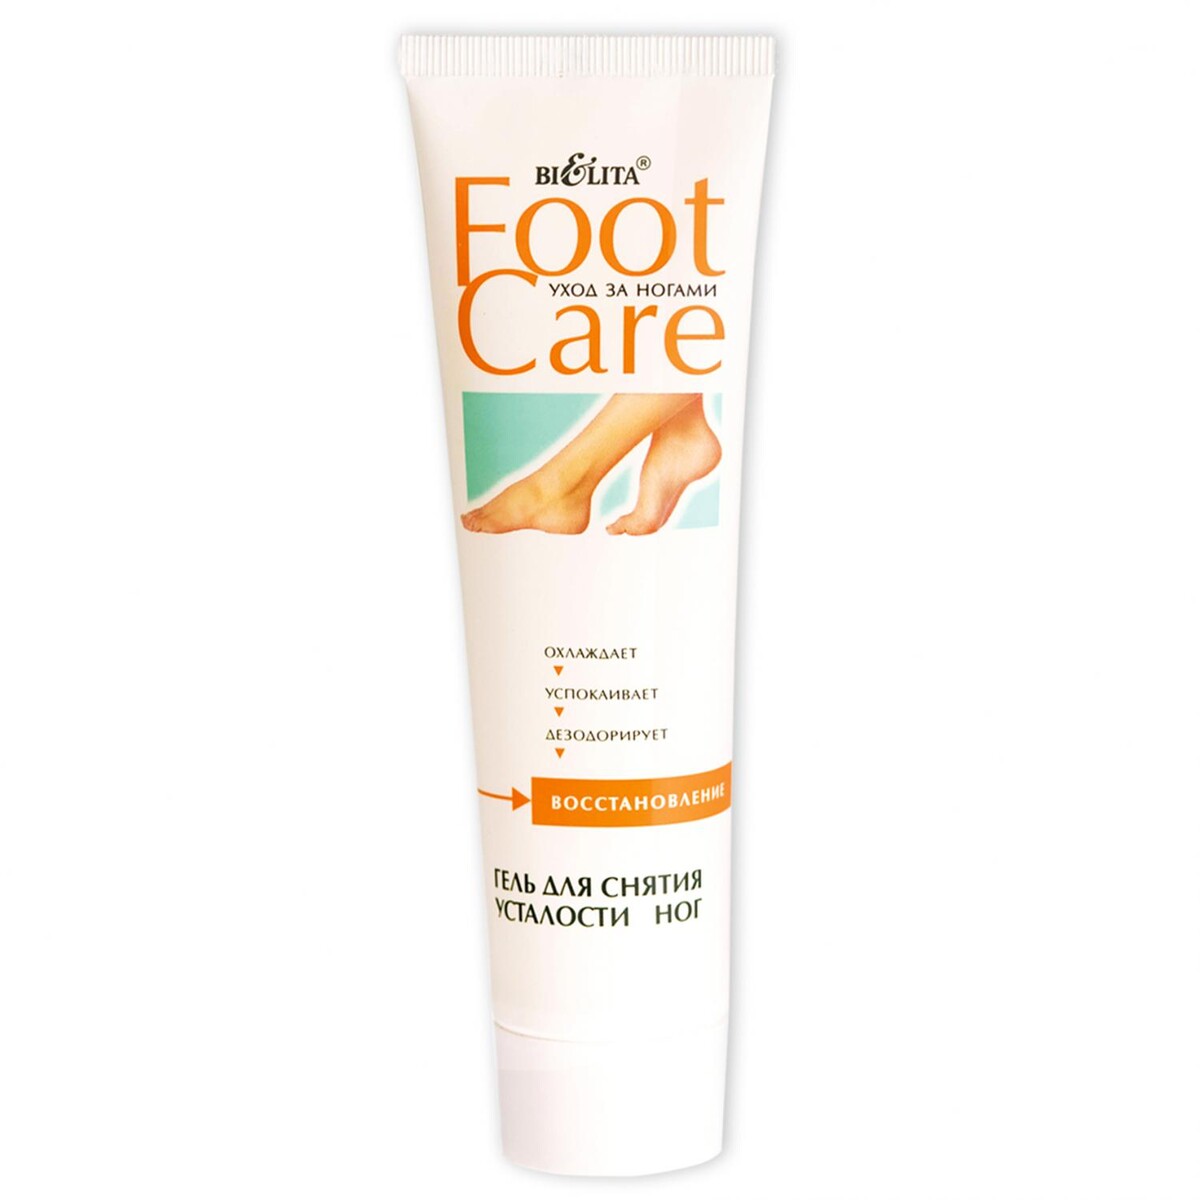    foot care  